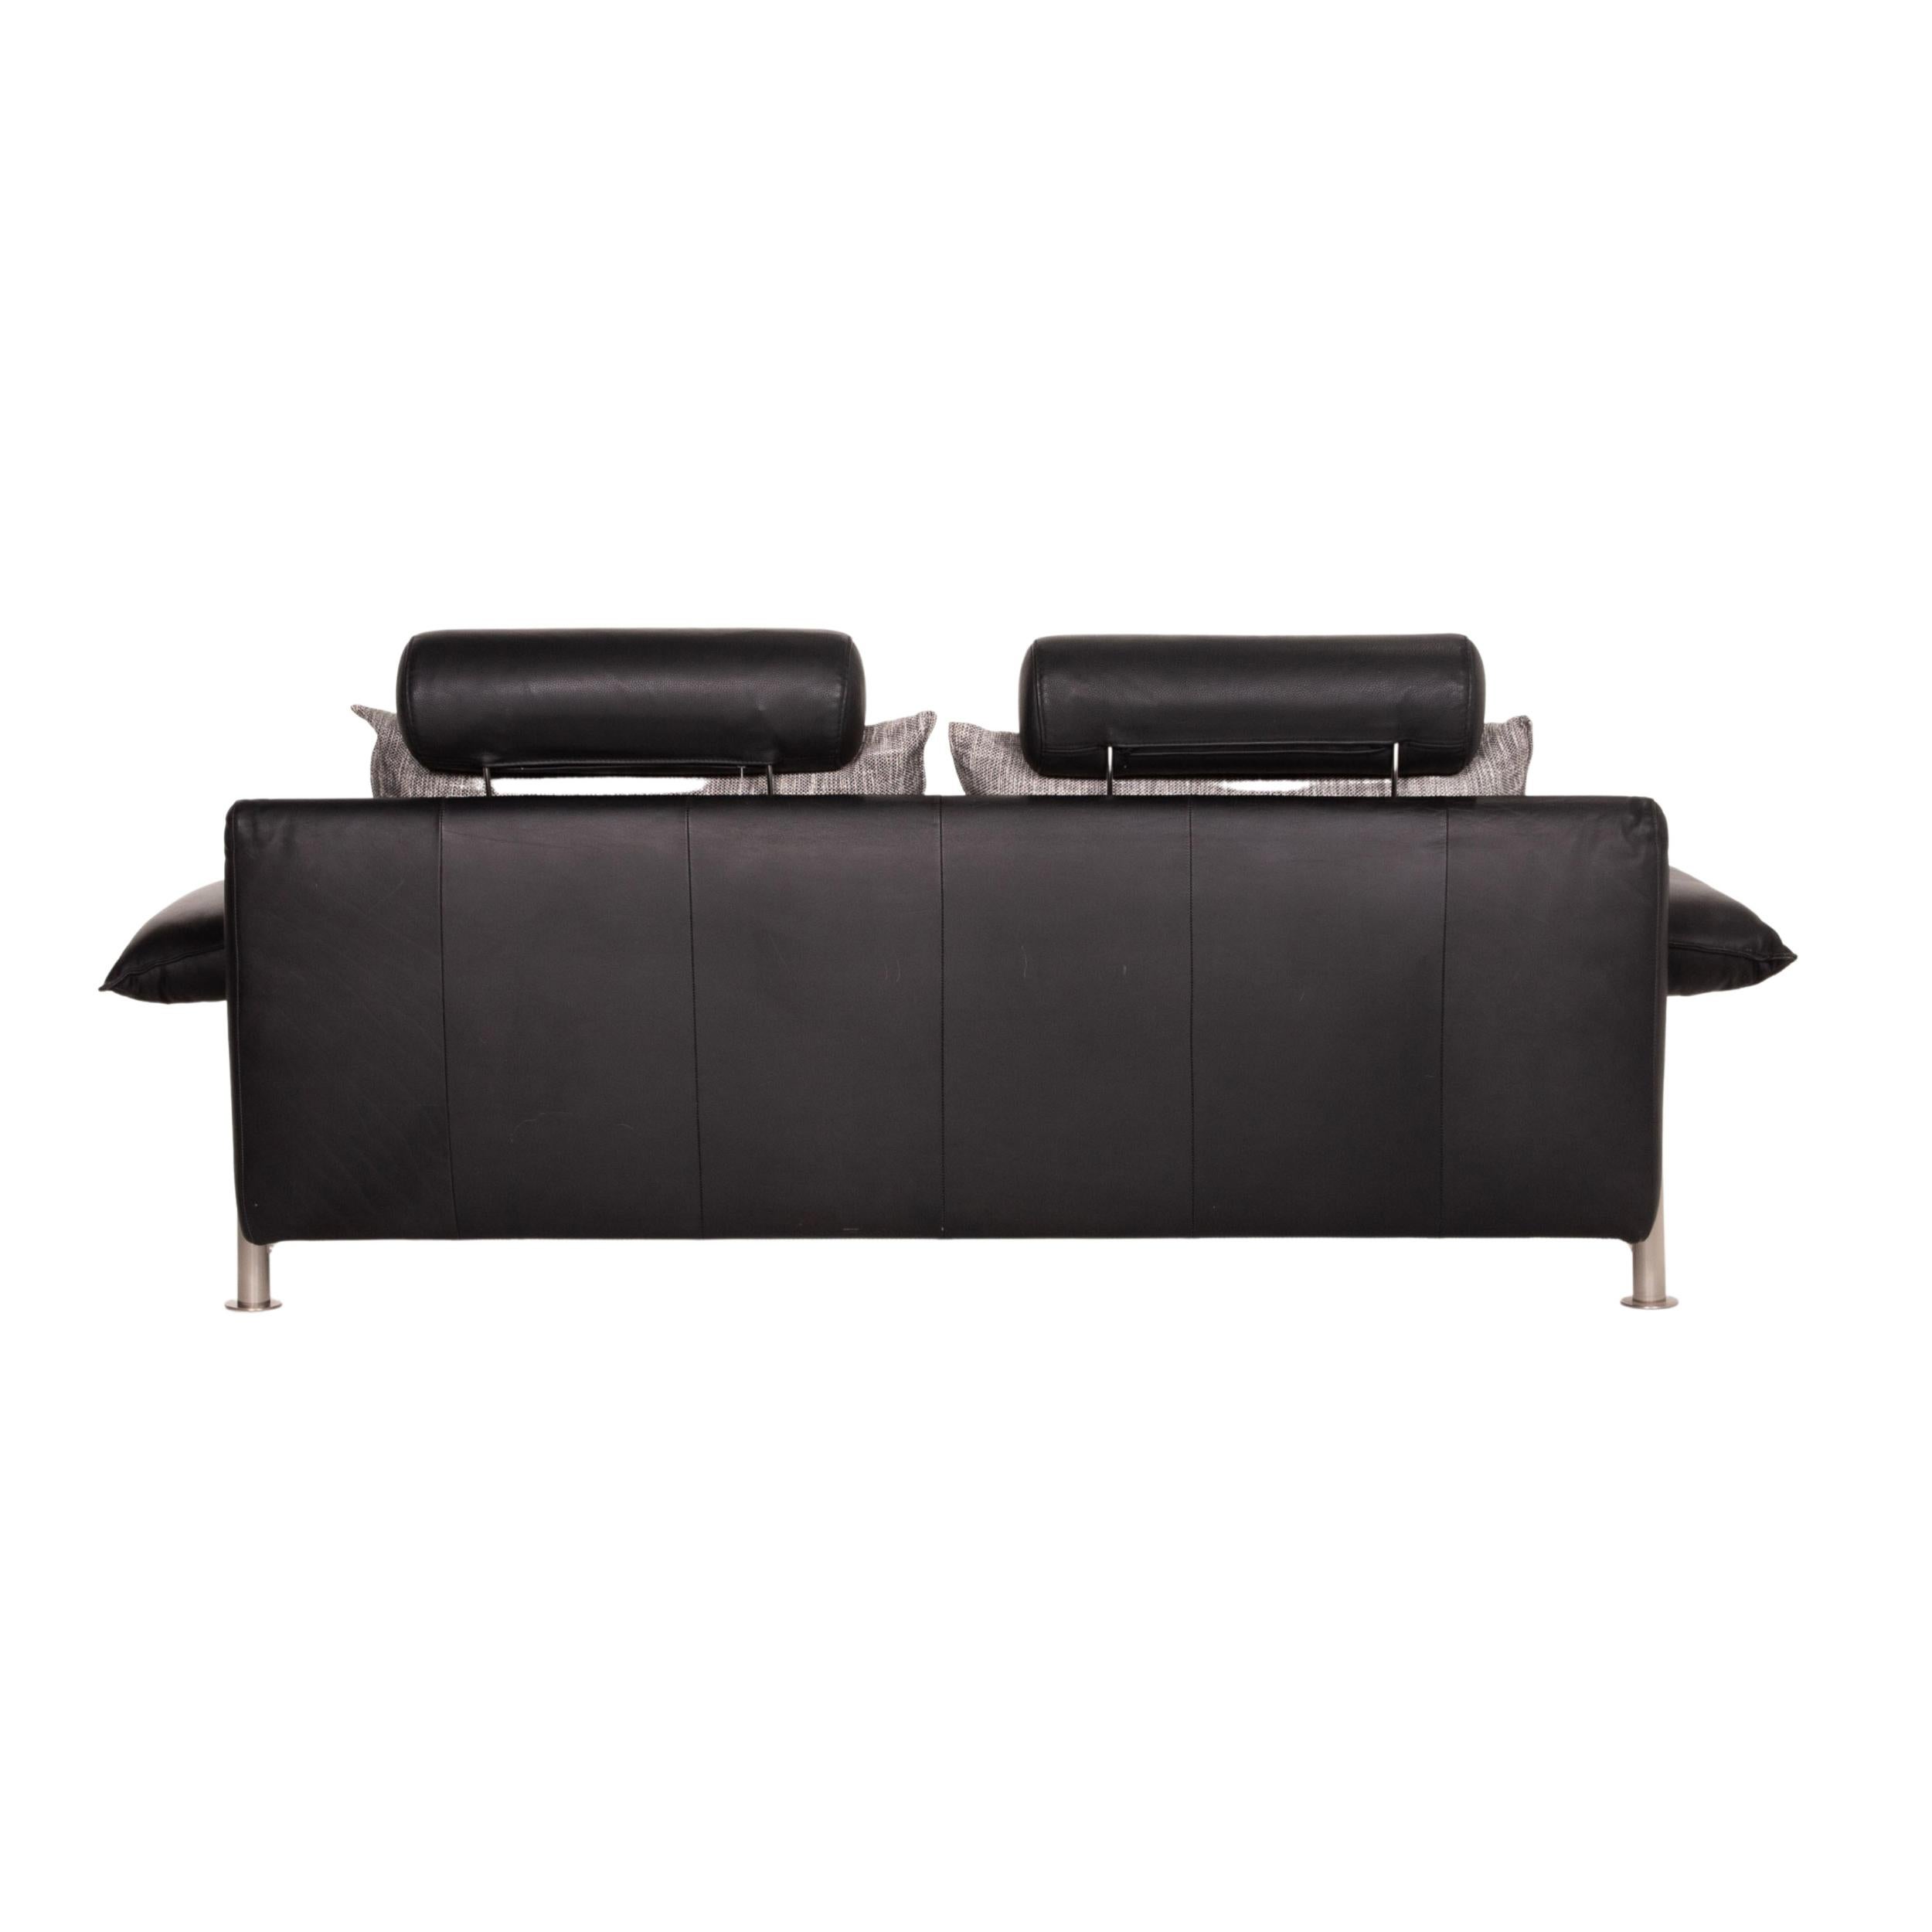 Möller Design Tayo Leather Sofa Black Two-Seat Couch 3